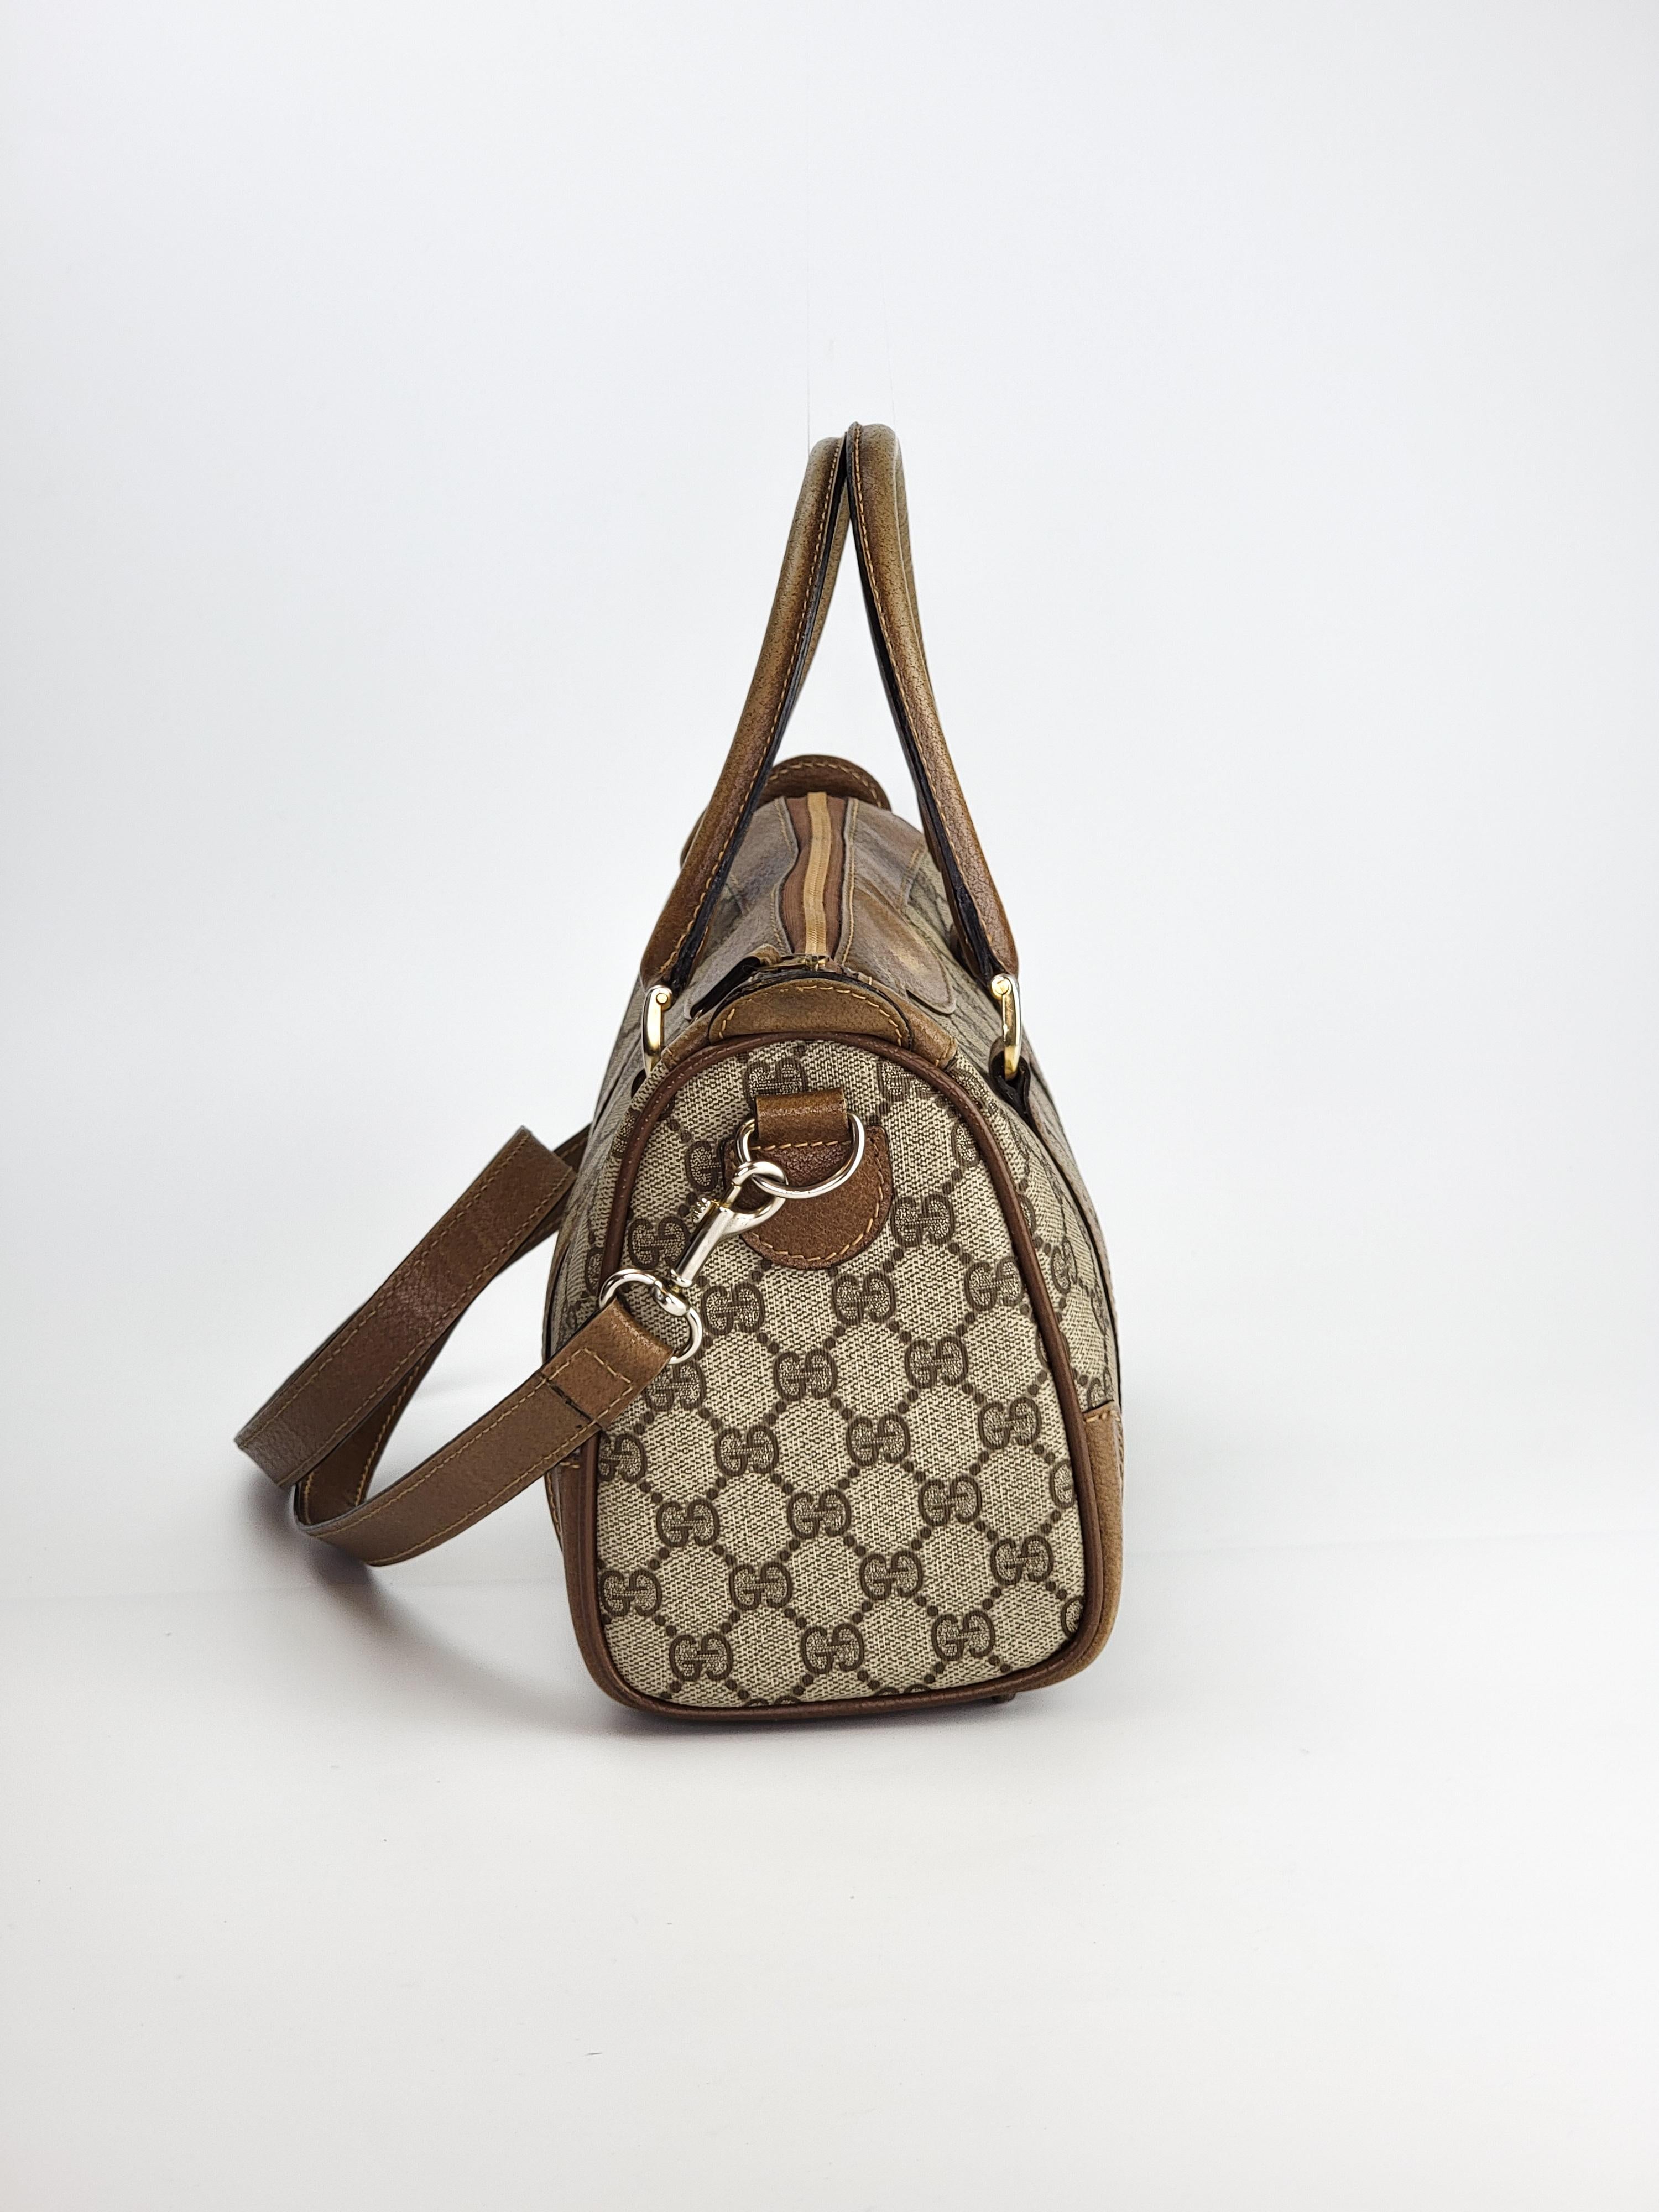 This vintage Gucci Boston bag is made with Gucci monogram supreme coated canvas with leather finishes. The bag measures 25 cm in length and features gold tone hardware, brown leather trim, dual rolled leather top handles, top zip closure. leather